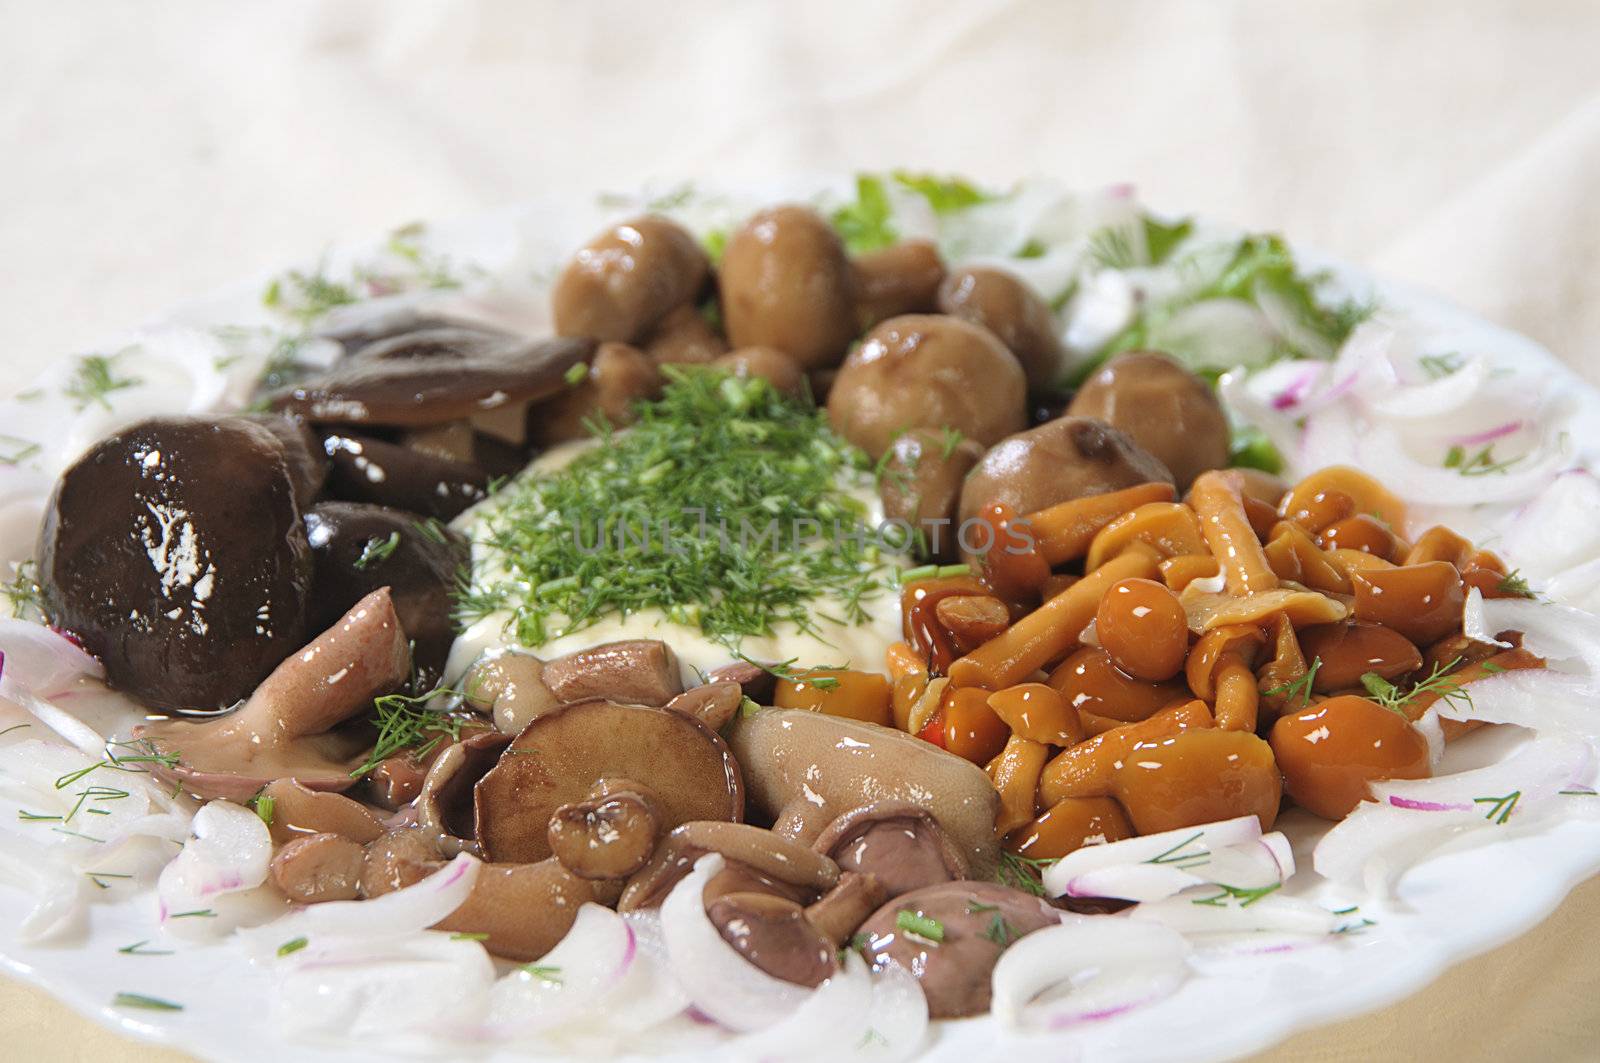 pickled mushrooms by dyoma